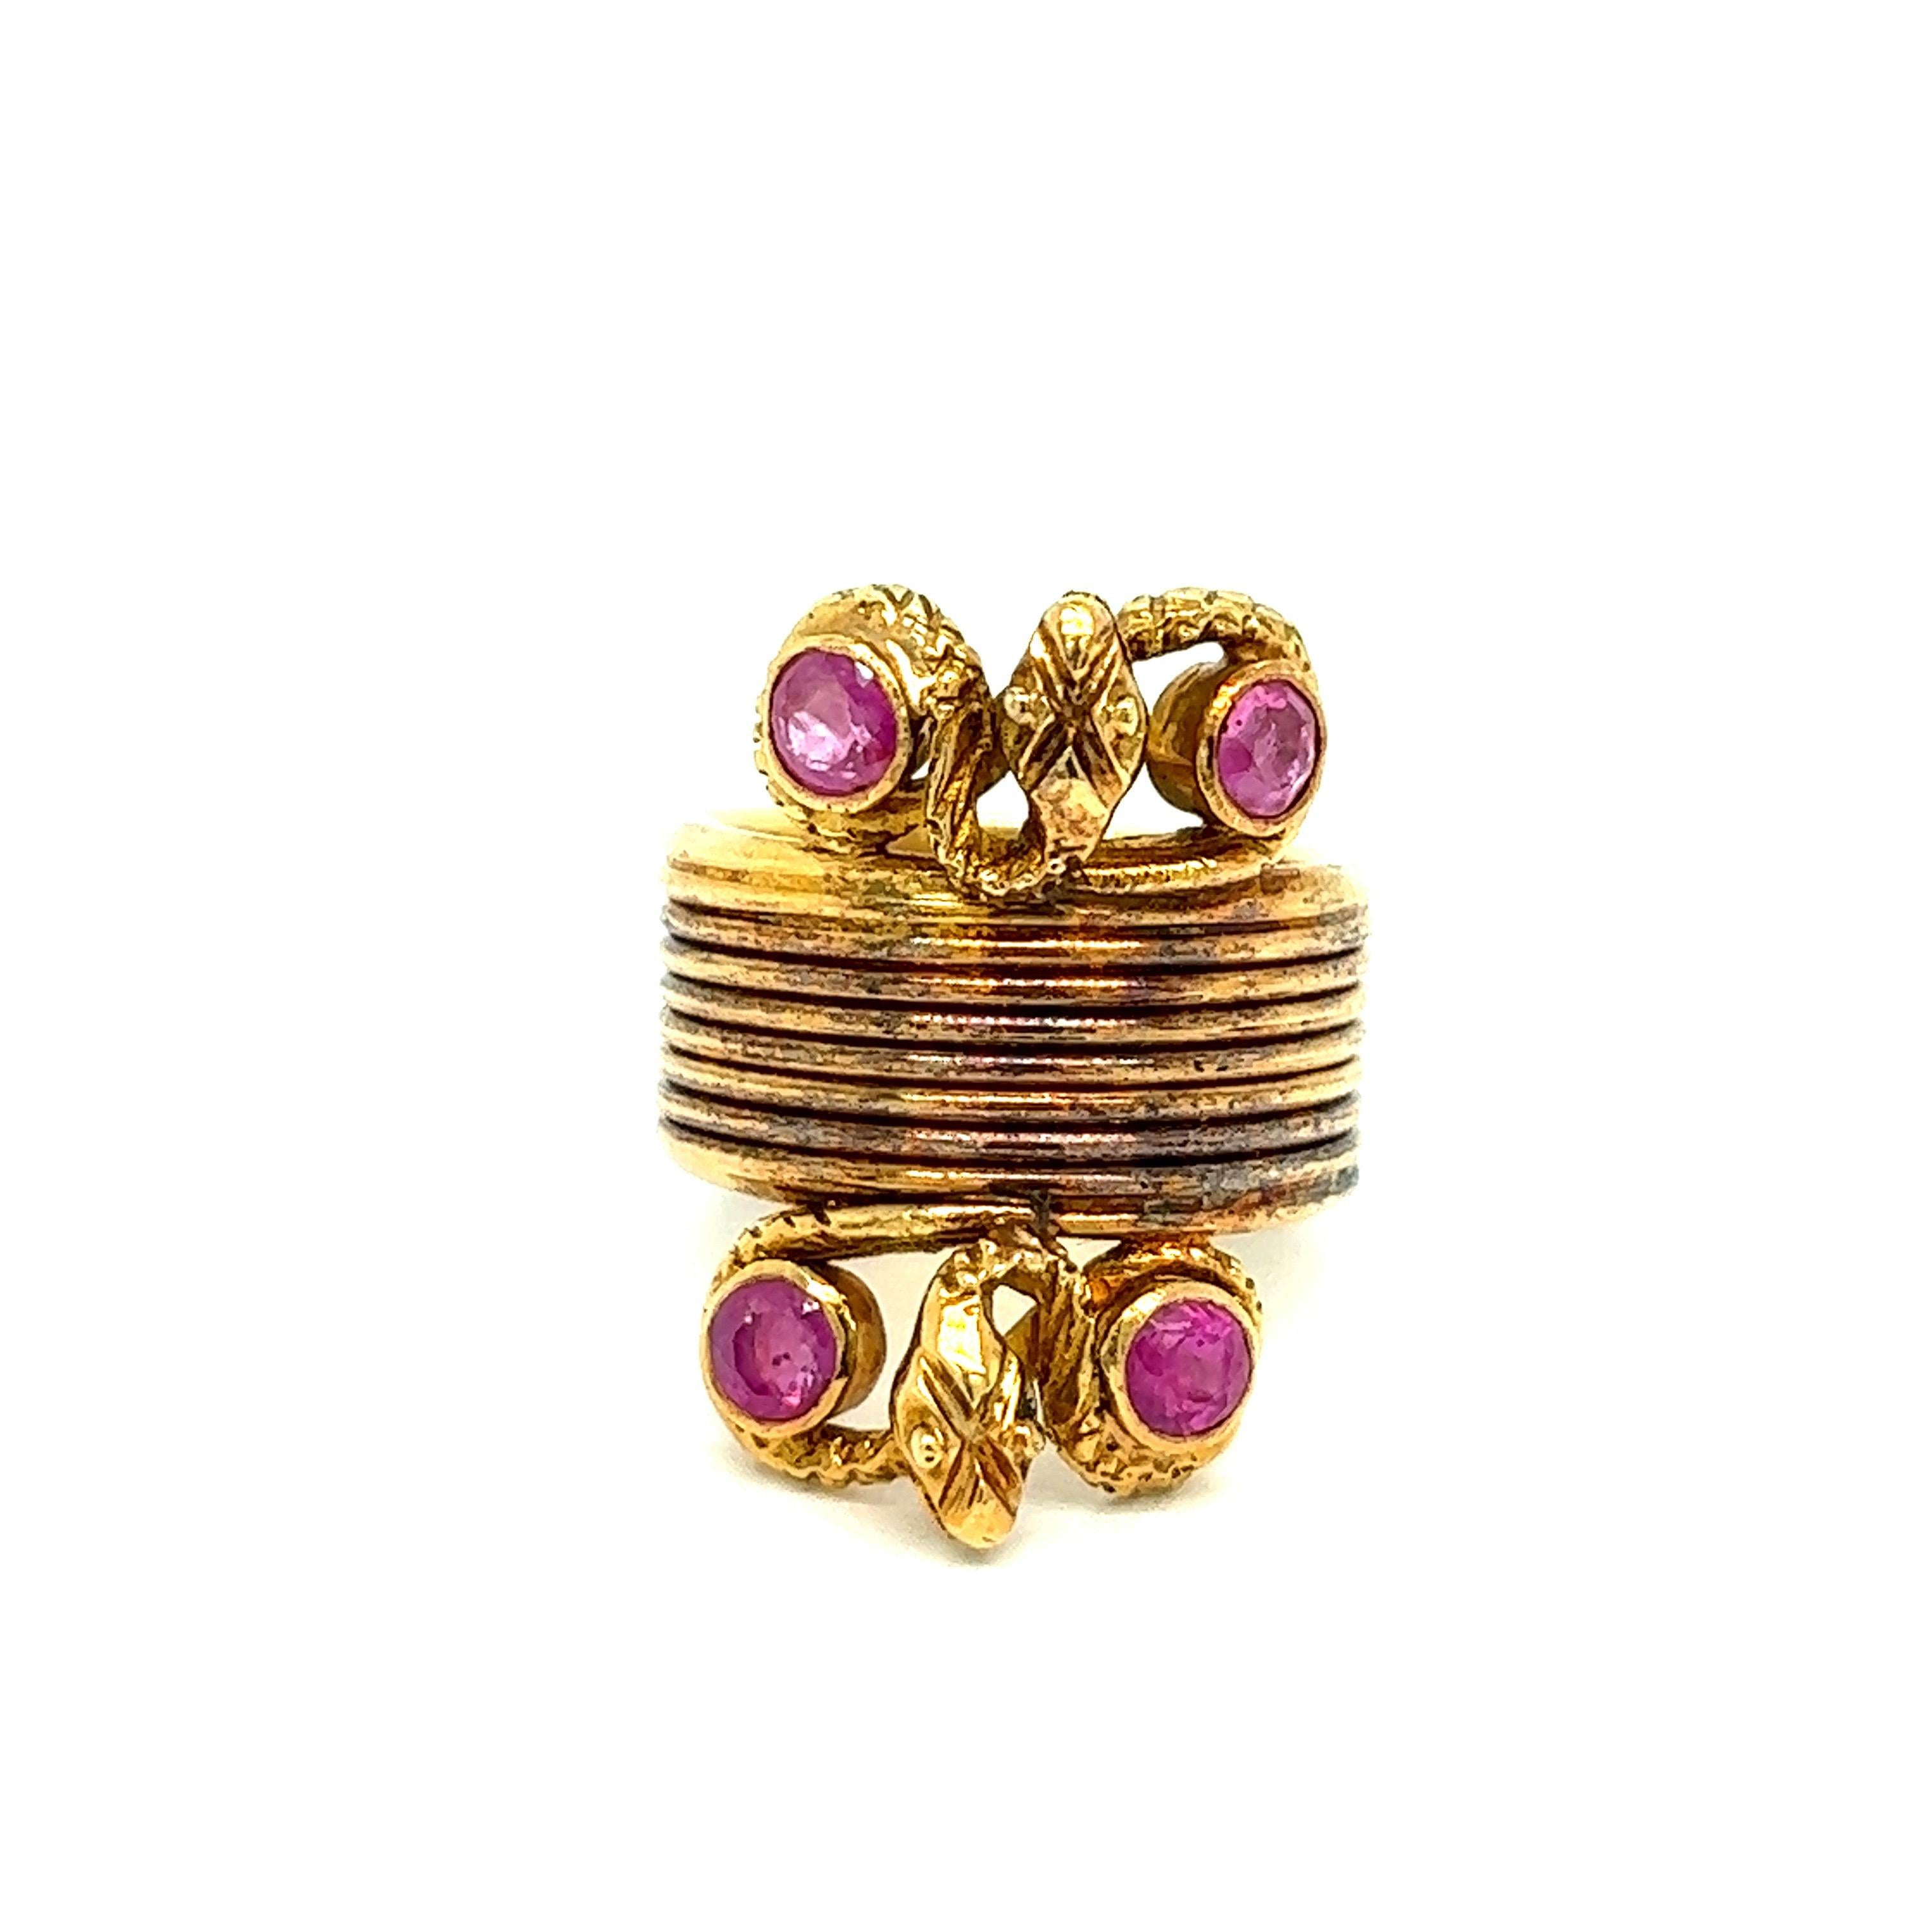 Ilias Lalaounis snake ruby gold ring 

Round-cut rubies of approximately 0.60 carat, 18 karat yellow gold, snakes motif; marked Ilias Lalaounis, A21

Size: 4.5 US
Total weight: 11.6 grams